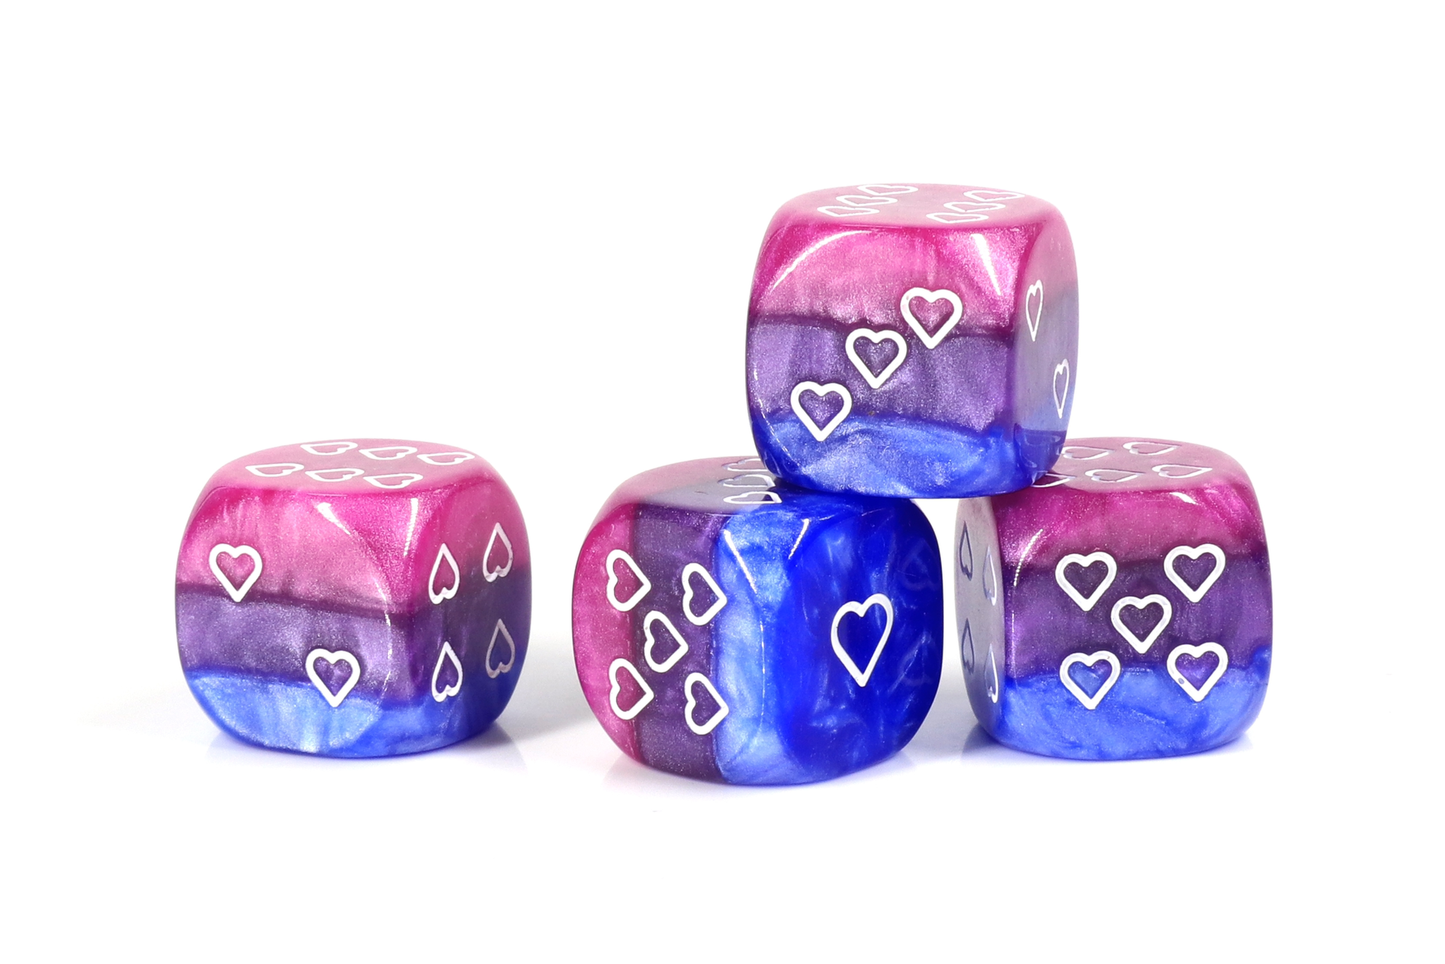 HeartBeat Dice: Bisexual Pride D6 Heart Dice 16mm (Set of 6 dice)